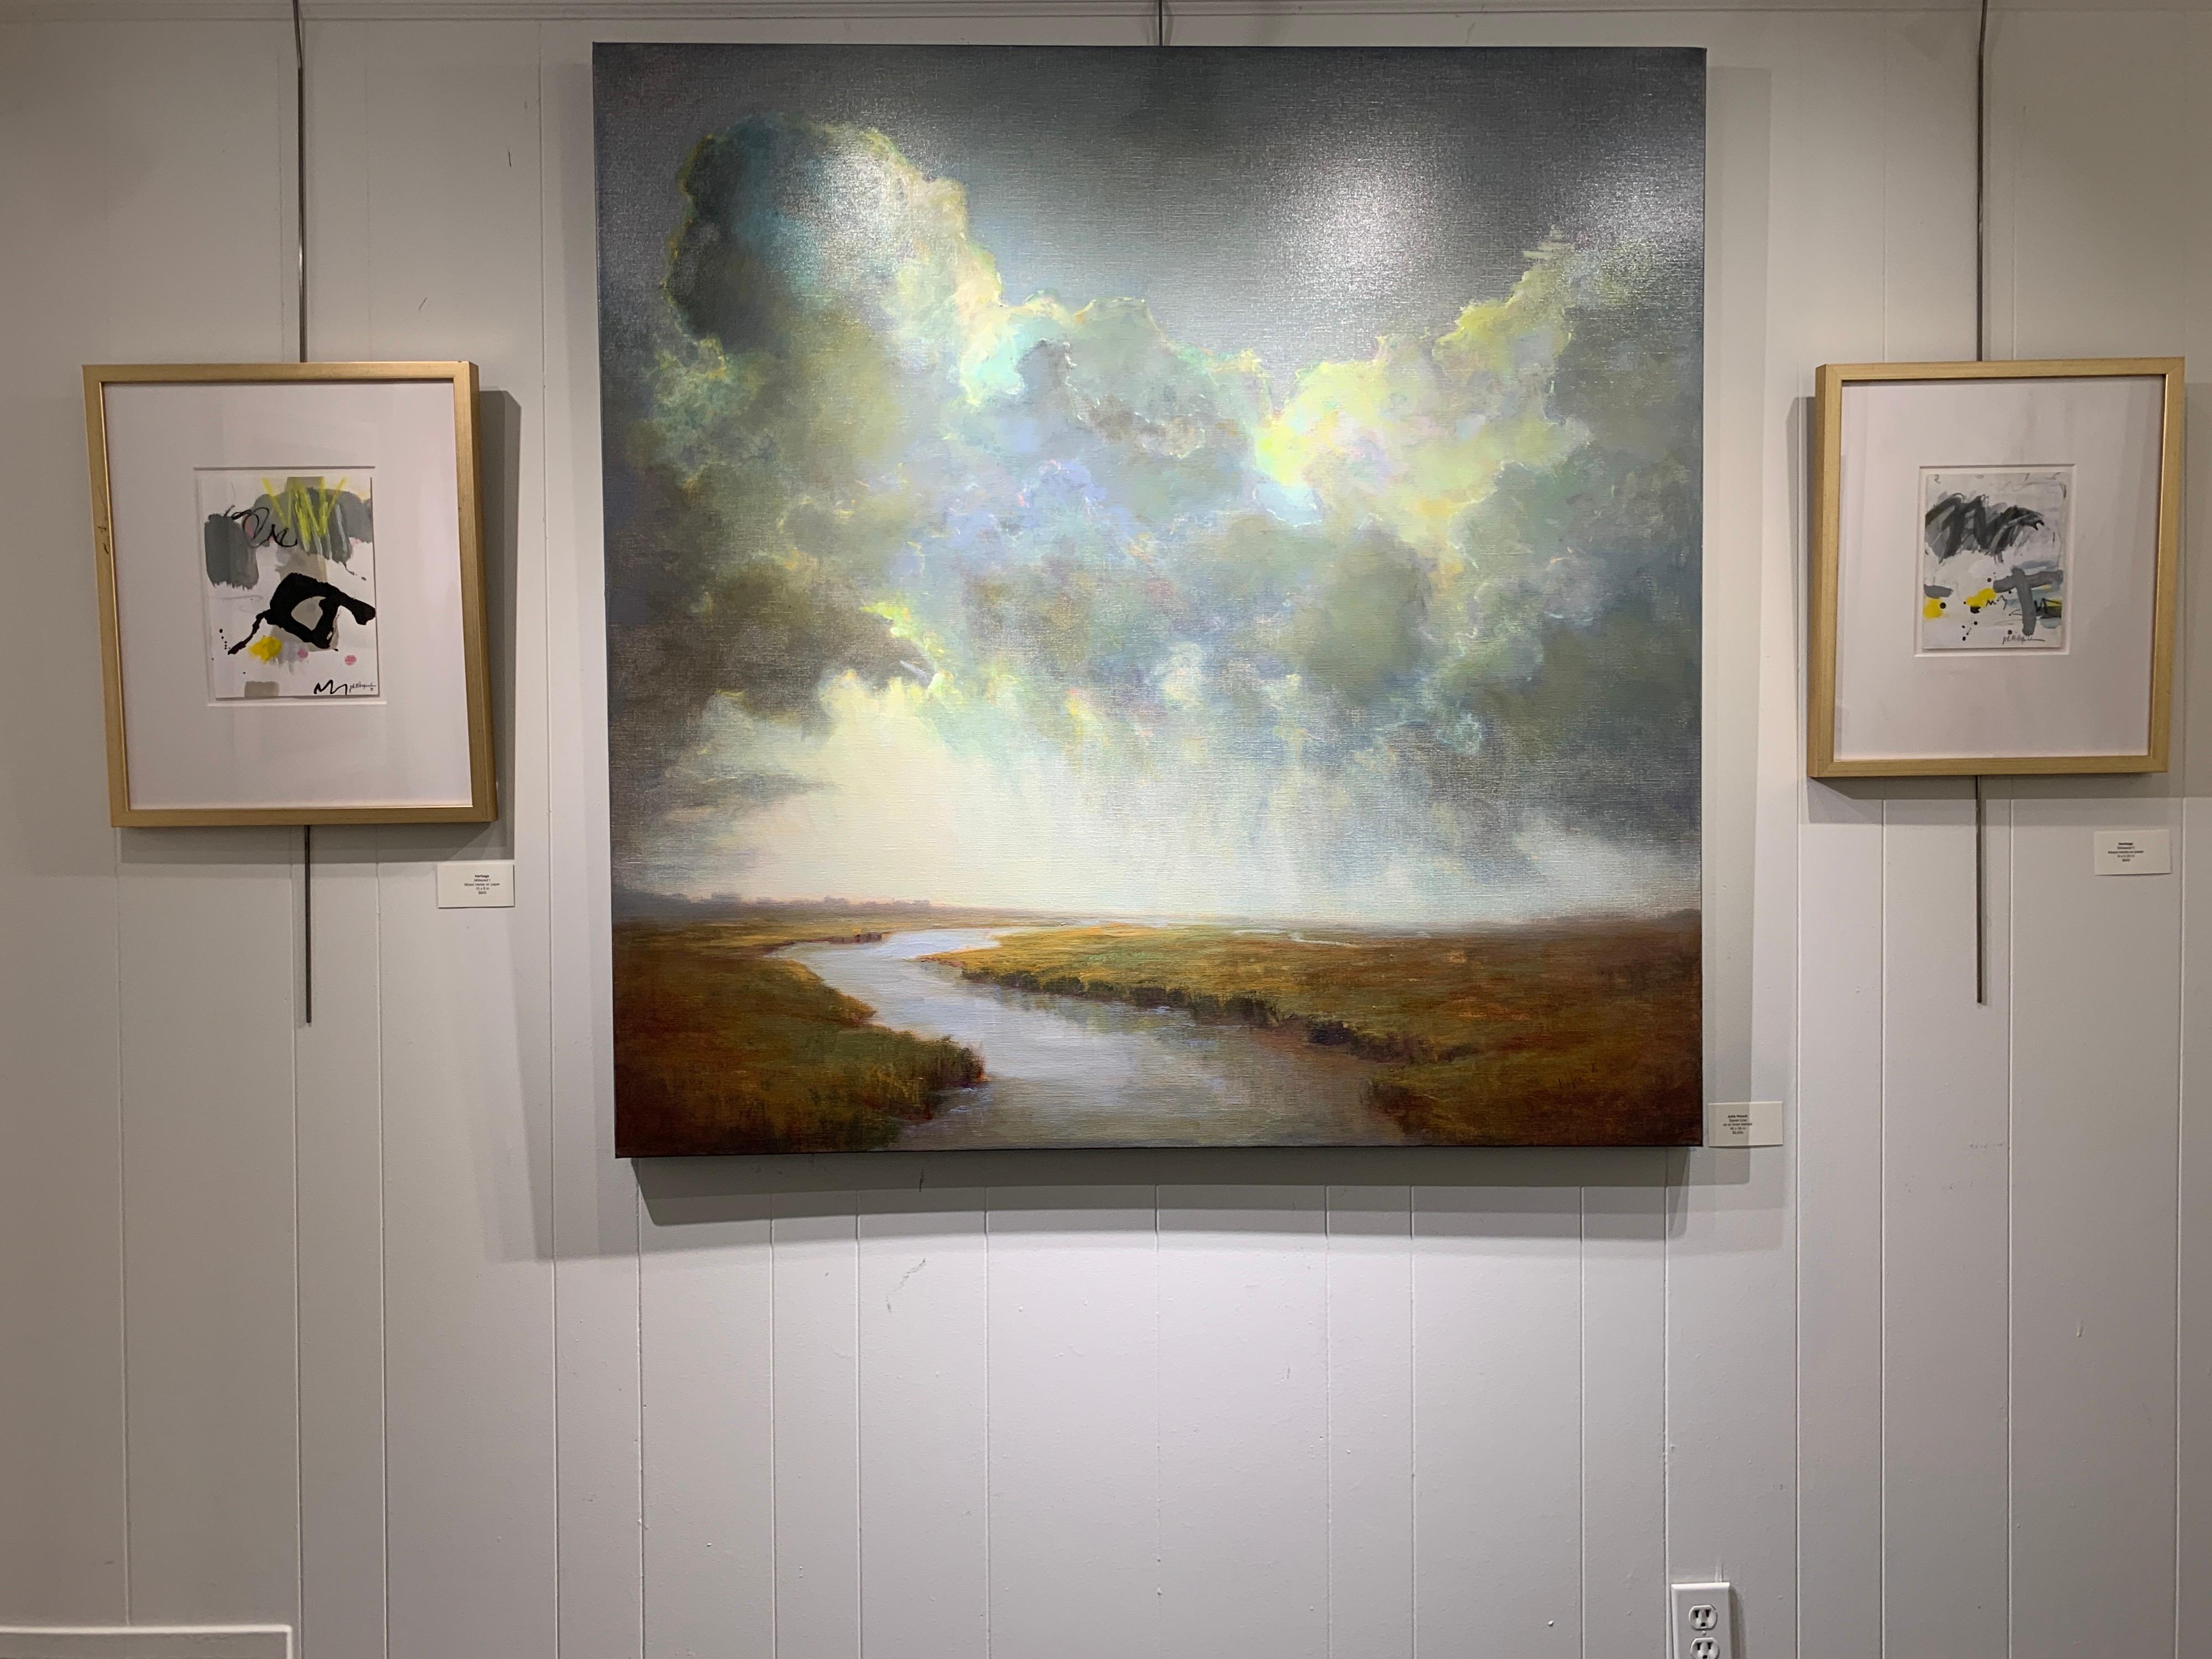 Featuring a luminous palette mostly made of blue, green, grey, soft yellow and white tones, the painting is a serene depiction of a marsh area, dominated by the striking presence of the sky. Two-thirds of the composition are dedicated to the fluffy